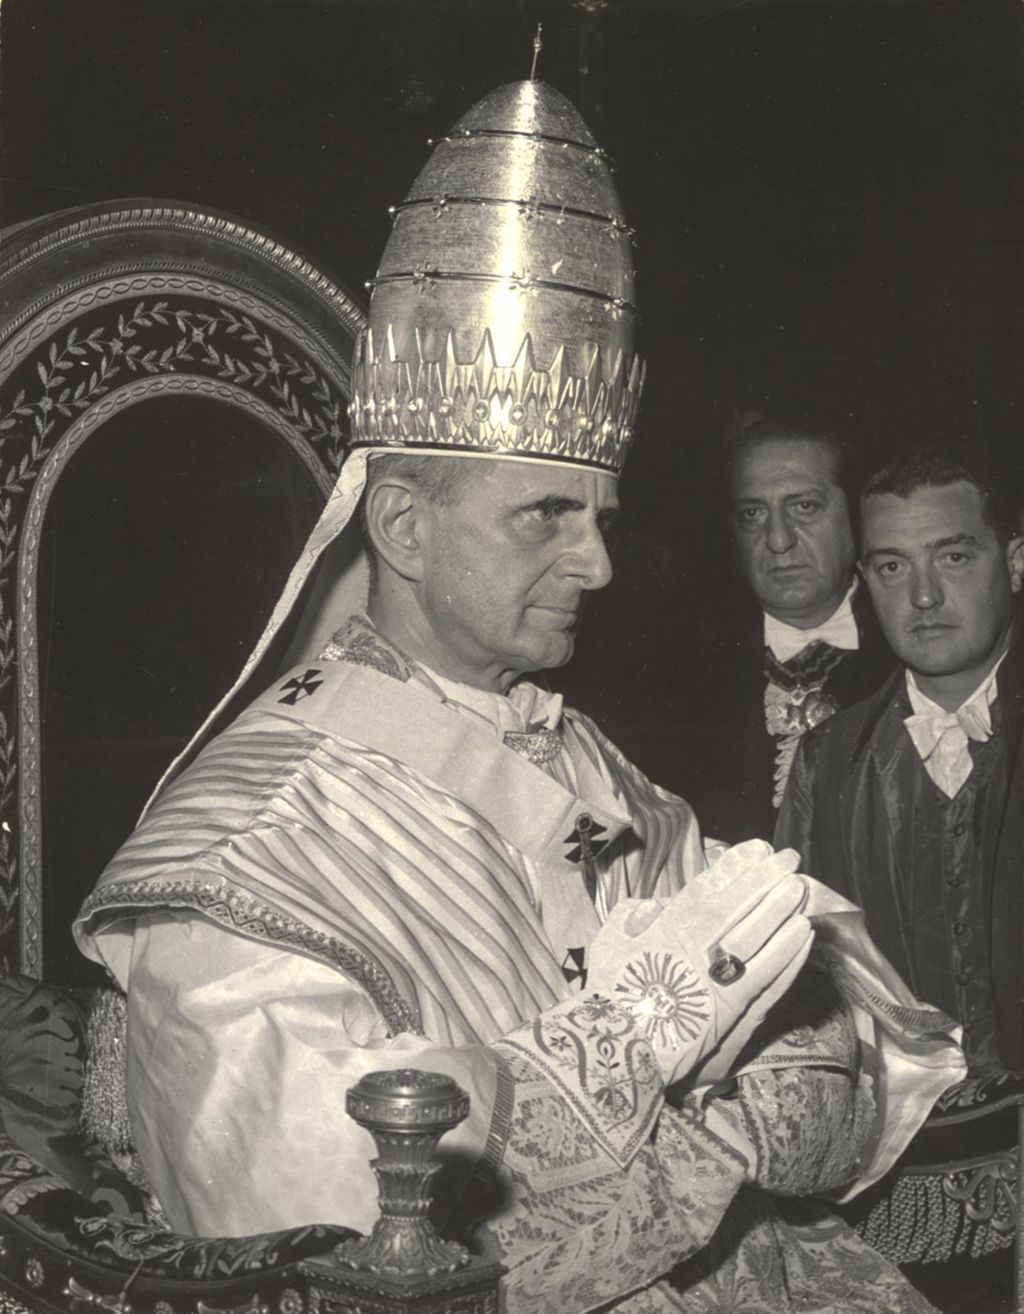 Pope Paul VI seated on the papal throne